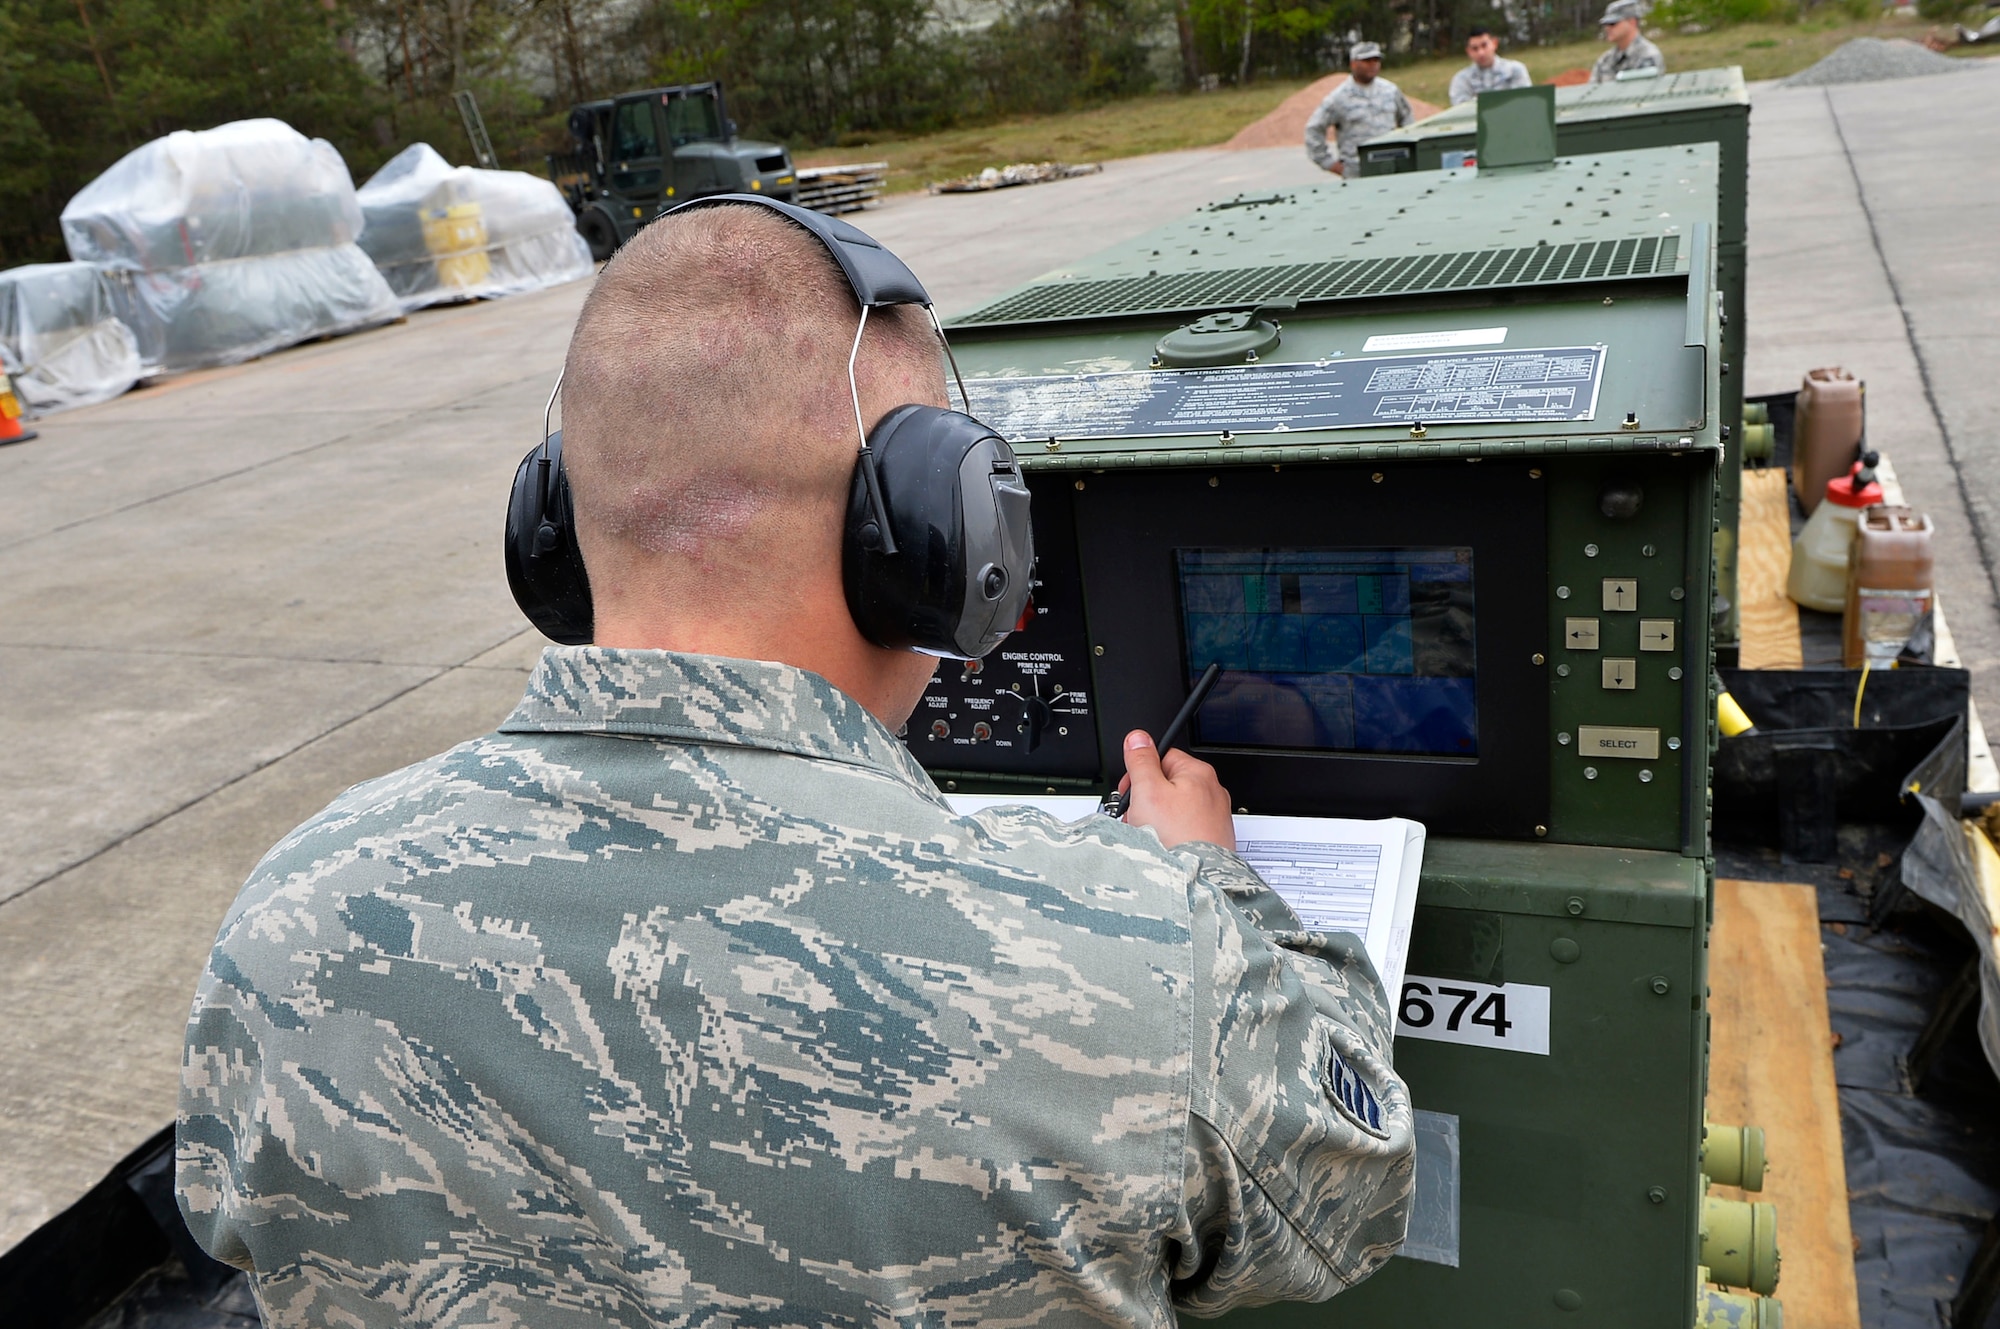 Tech. Sgt. Richard Thorsen, 1st Combat Communications Squadron power production supervisor, operates a generator during an exercise on Ramstein Air Base, Germany, April 26, 2017. Combat Communications Airmen are responsible for helping provide secure and reliable communications for the U.S. military in a wide range of challenging environments. (U.S. Air Force photo by Airman 1st Class Joshua Magbanua)